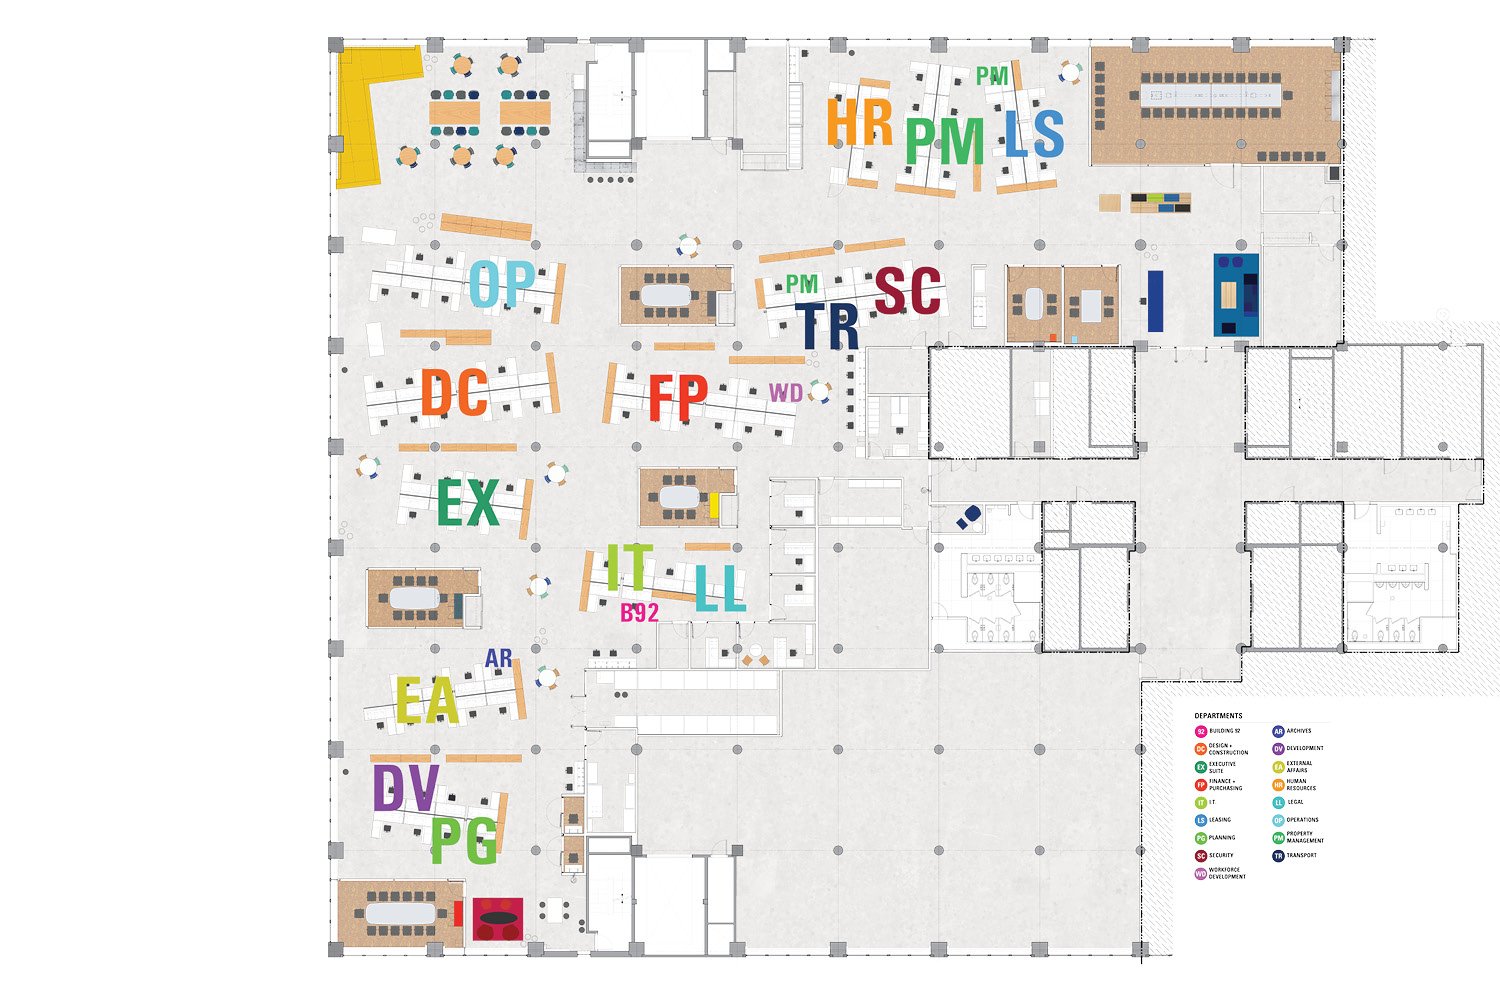 Floor plan and team clusters | SM+H Architects LLP